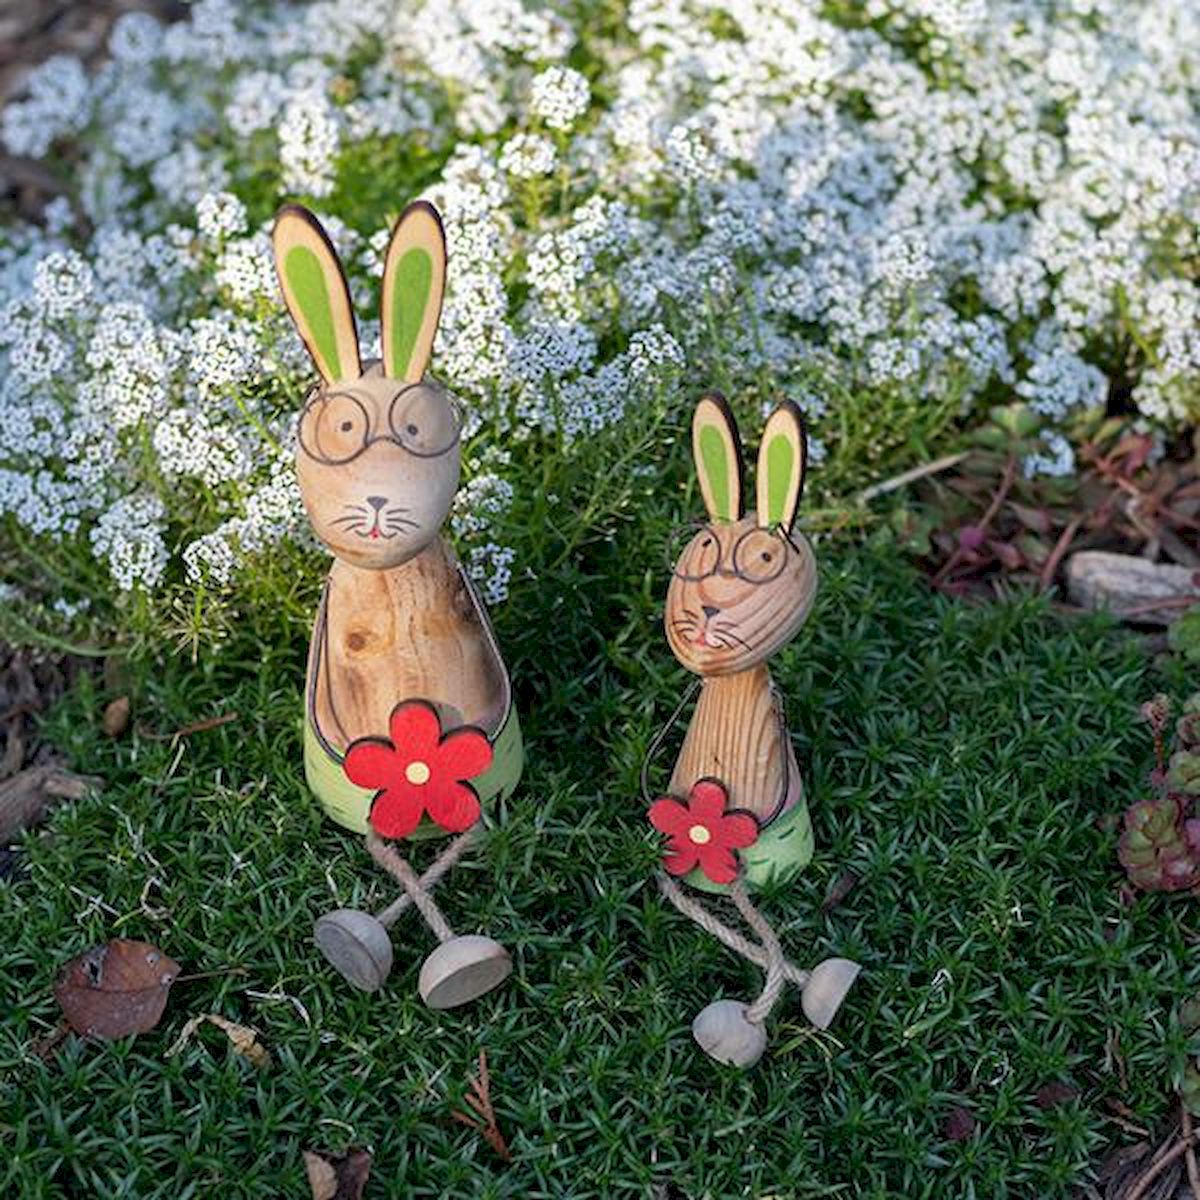 Picture of Forpost FP-HUS-325 Wooden Sitting Rabbits Holding Flowers Figurine - Set of 2